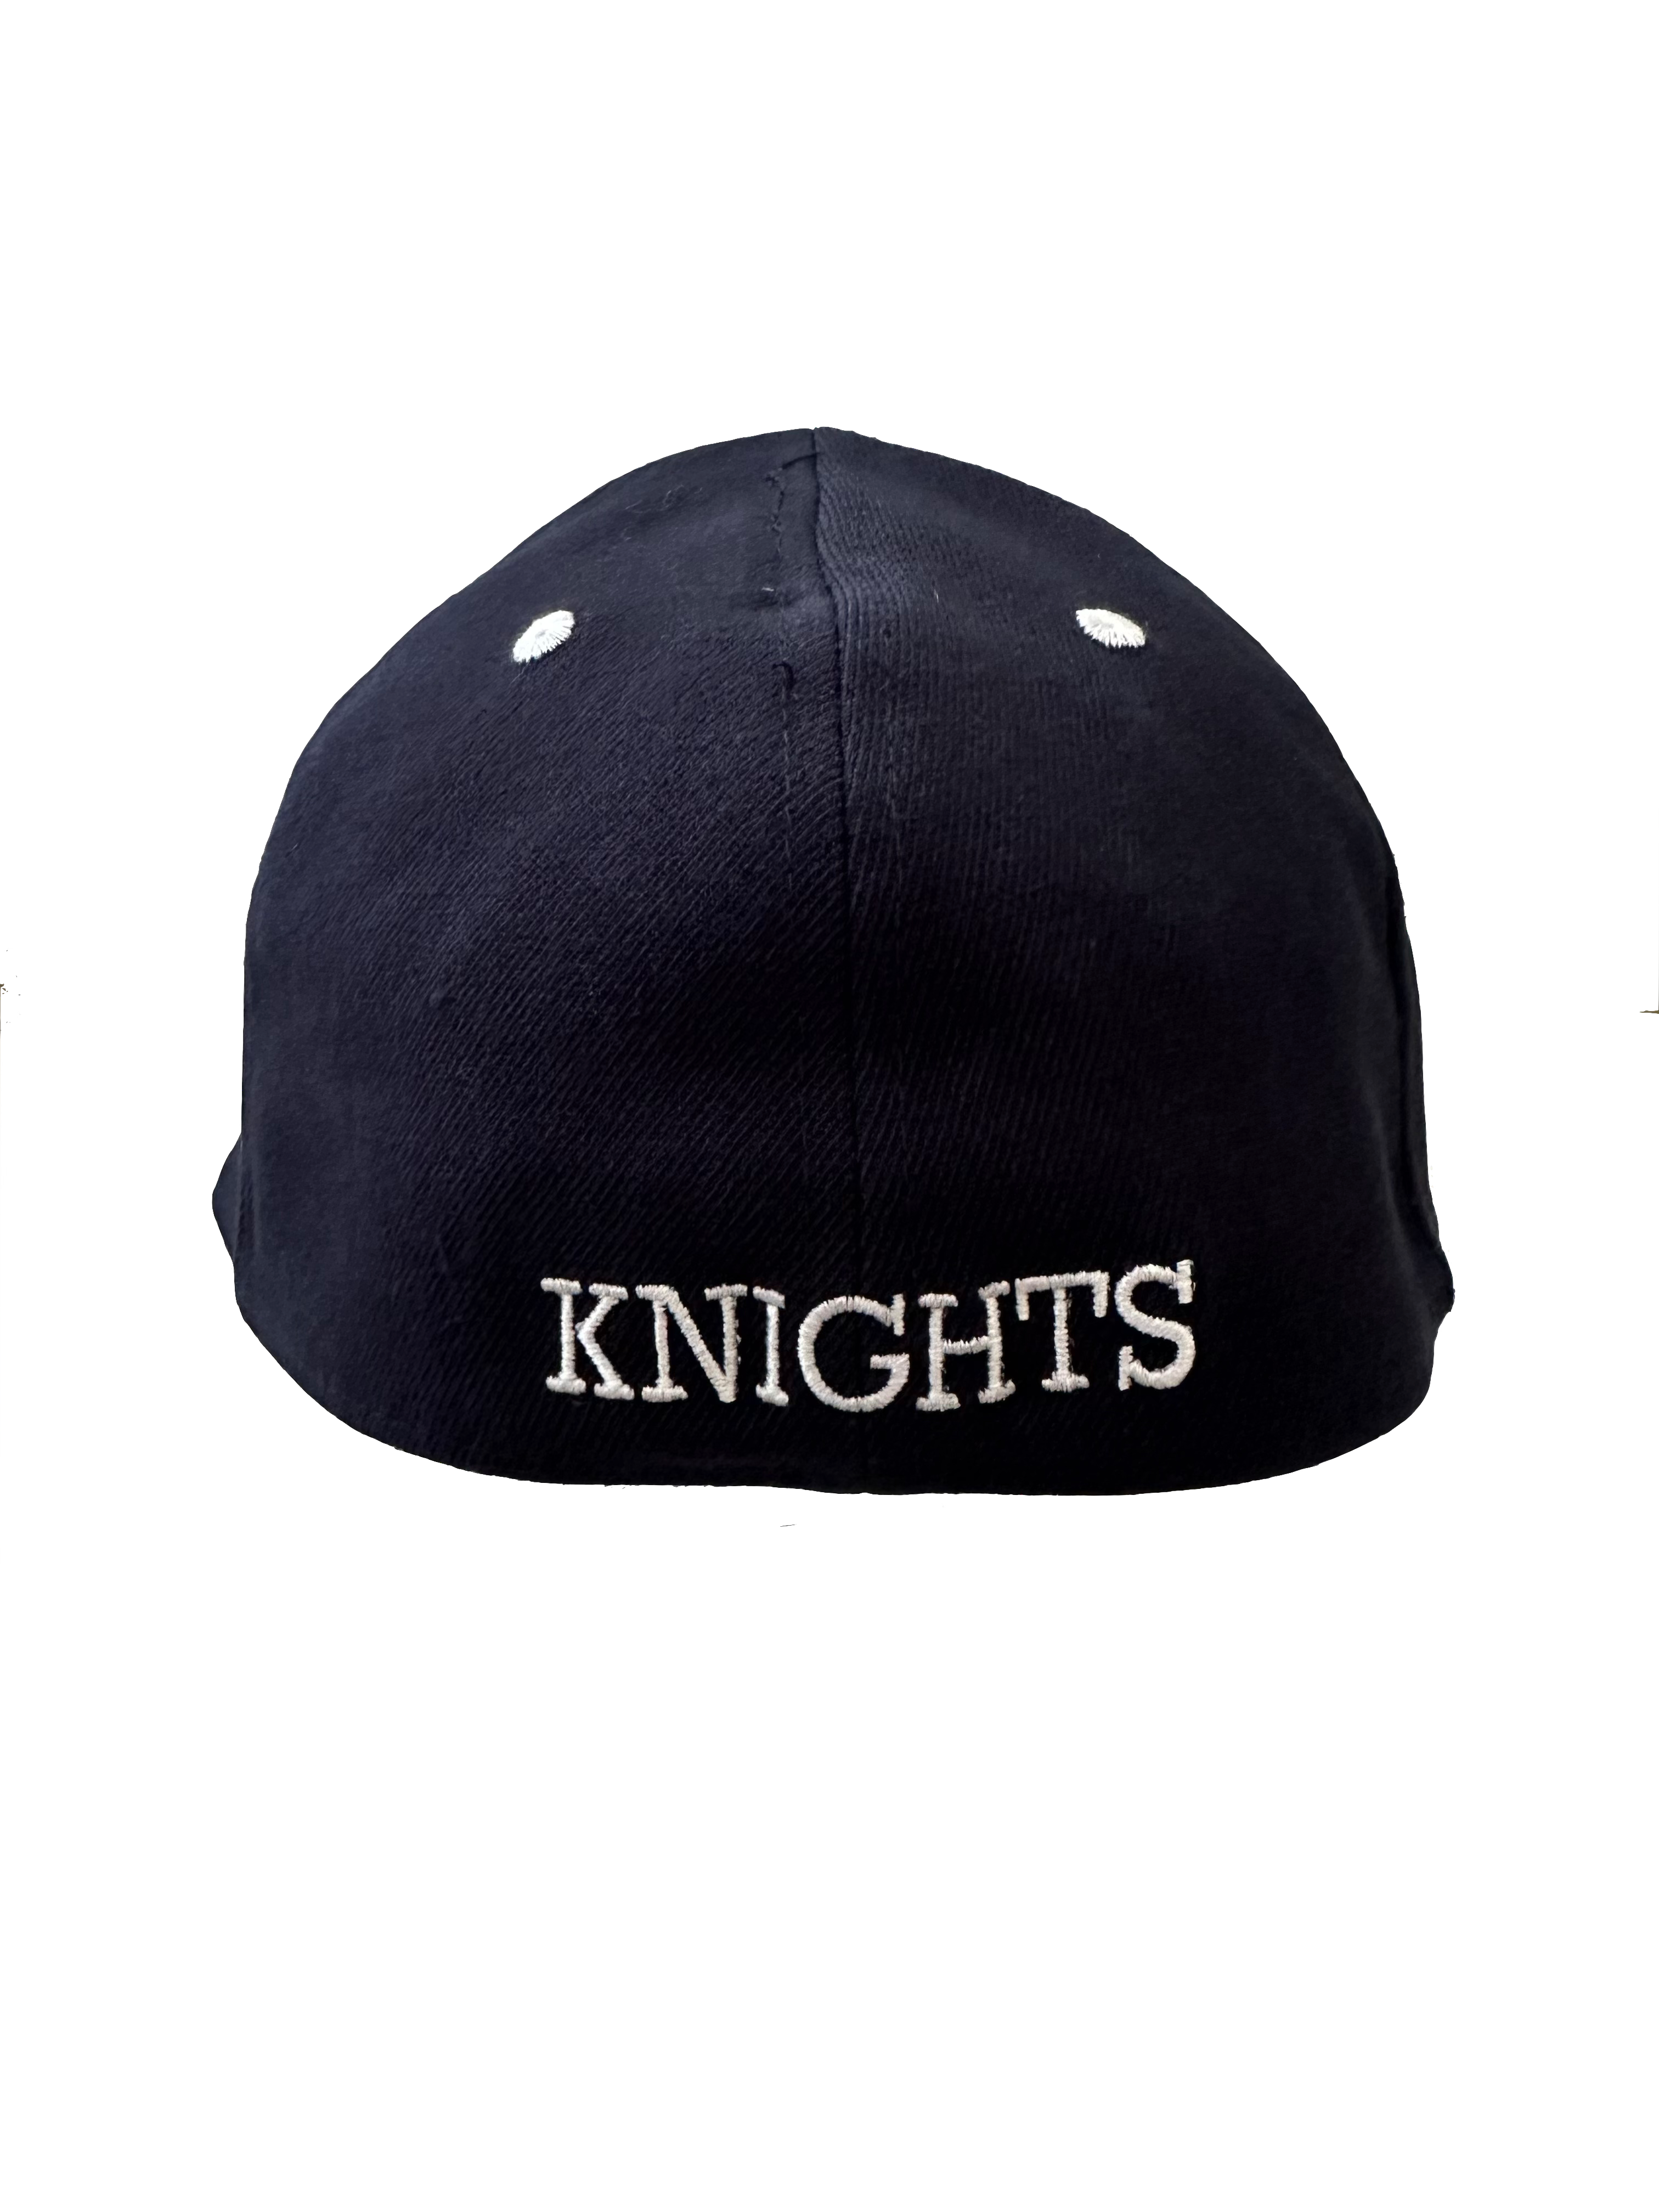 NEW Navy UL/Knights Game Pro Stretch Fit Wool Blend Cap